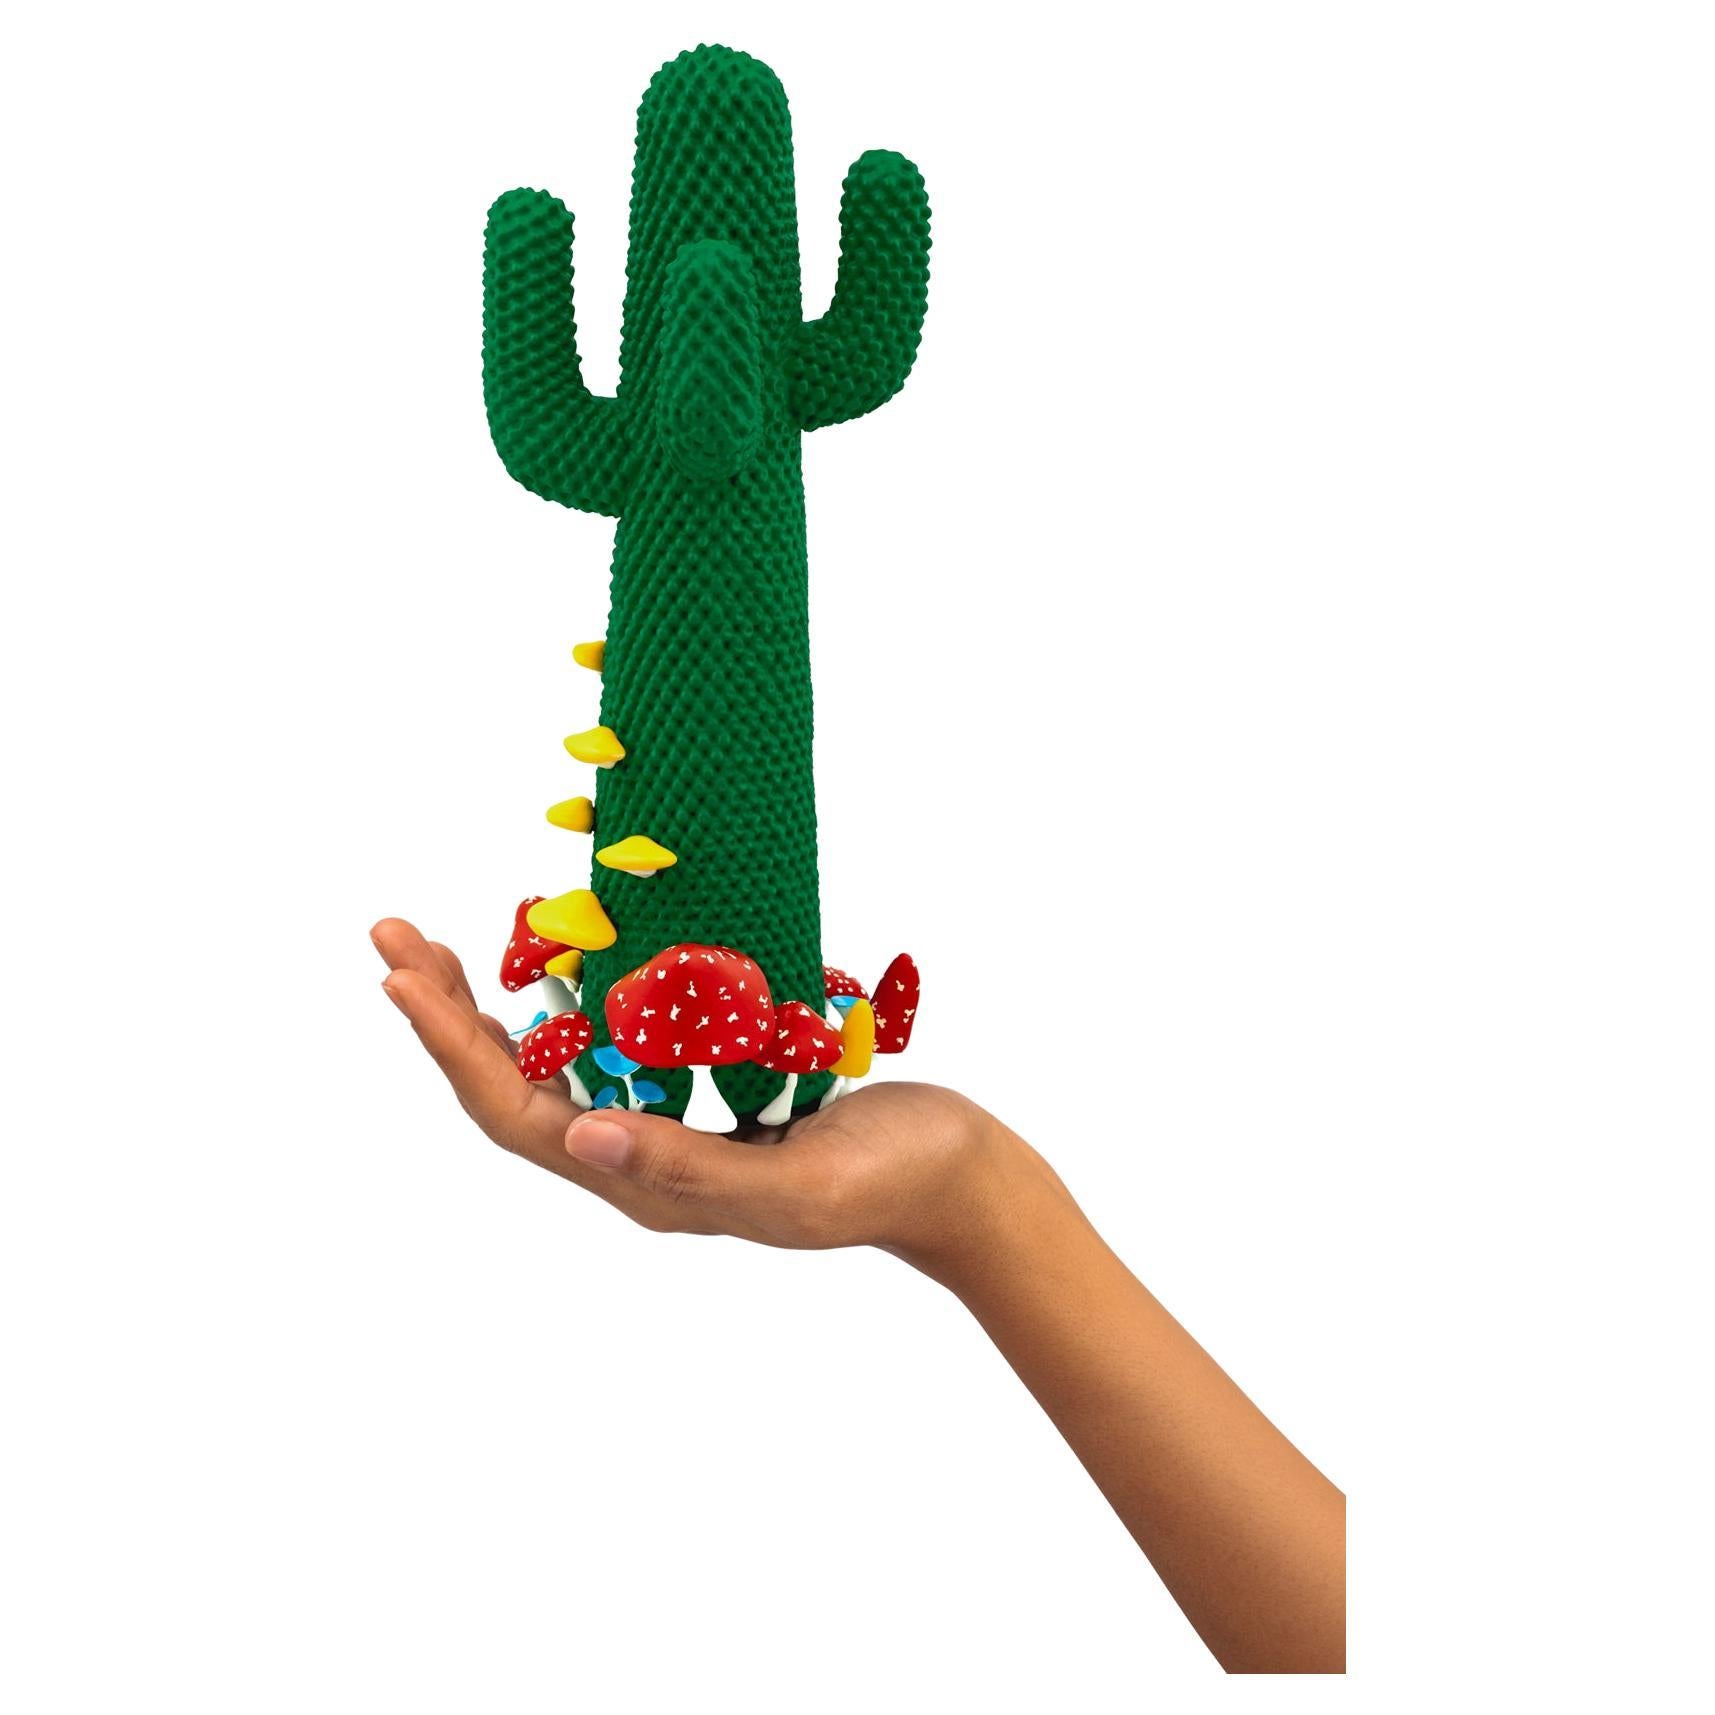 Limited Edition #61/99

Gufram presents the miniaturised version of the Shroom CACTUS® created in collaboration with A$AP Rocky and the artist’s new design studio HOMMEMADE Exactly as the real-size Shroom CACTUS®, the new Guframini piece features